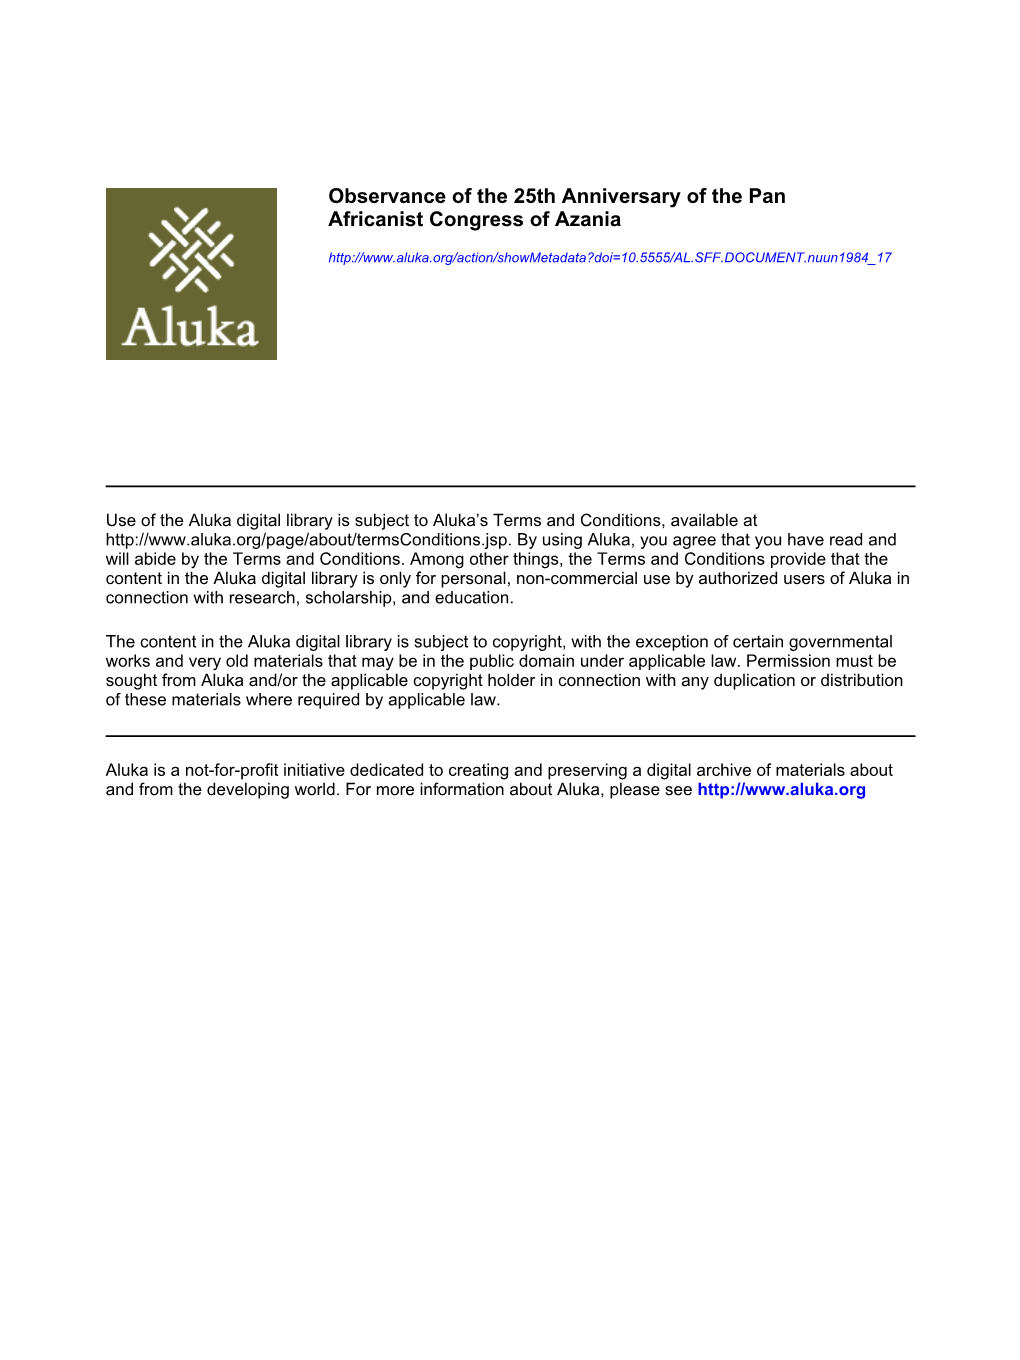 Observance of the 25Th Anniversary of the Pan Africanist Congress of Azania